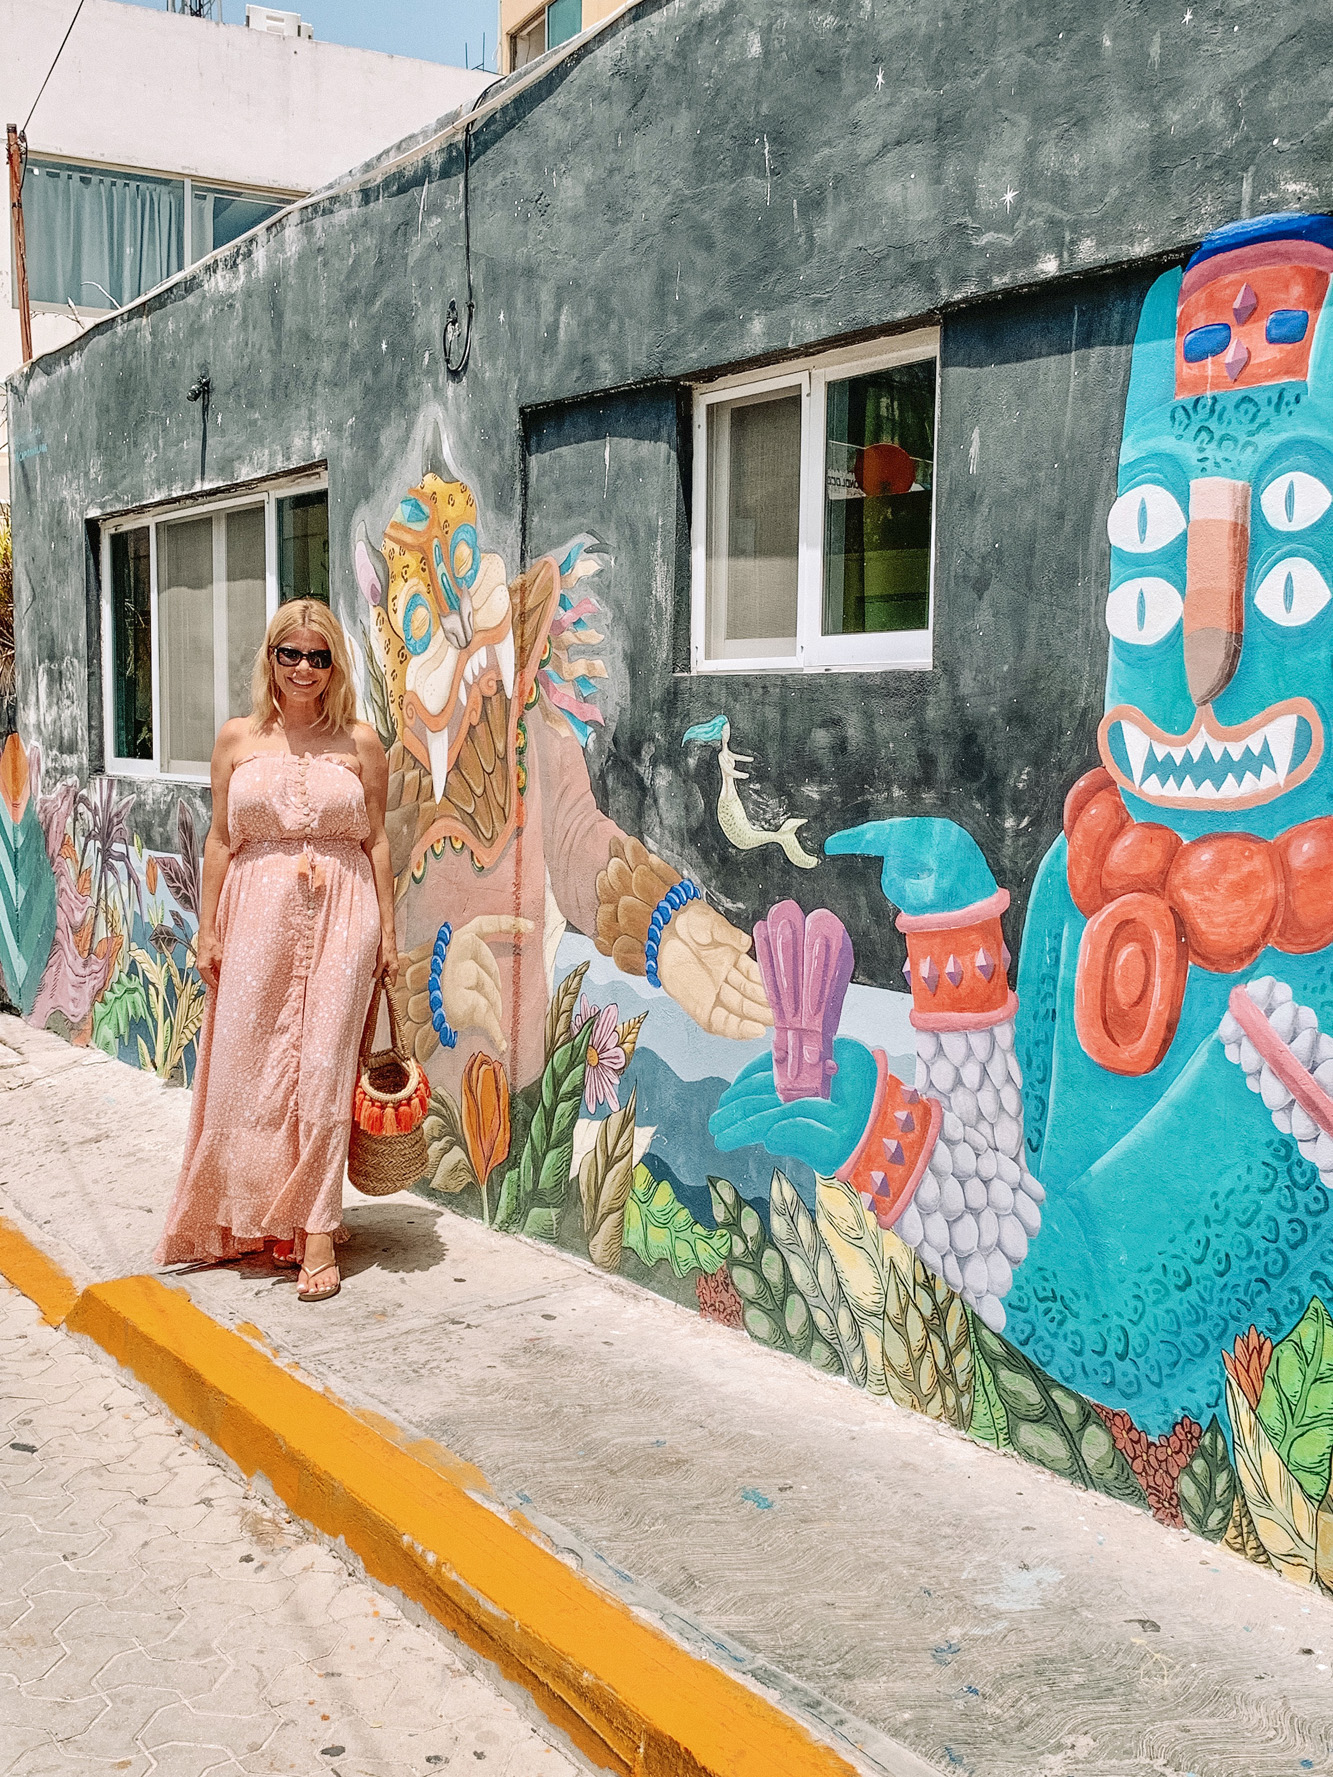 Cancun Travel Guide - Where to Stay, Eat, and Play in the Yucatan peninsula! All of our best tips and tricks when traveling to Cancun, Mexico. 